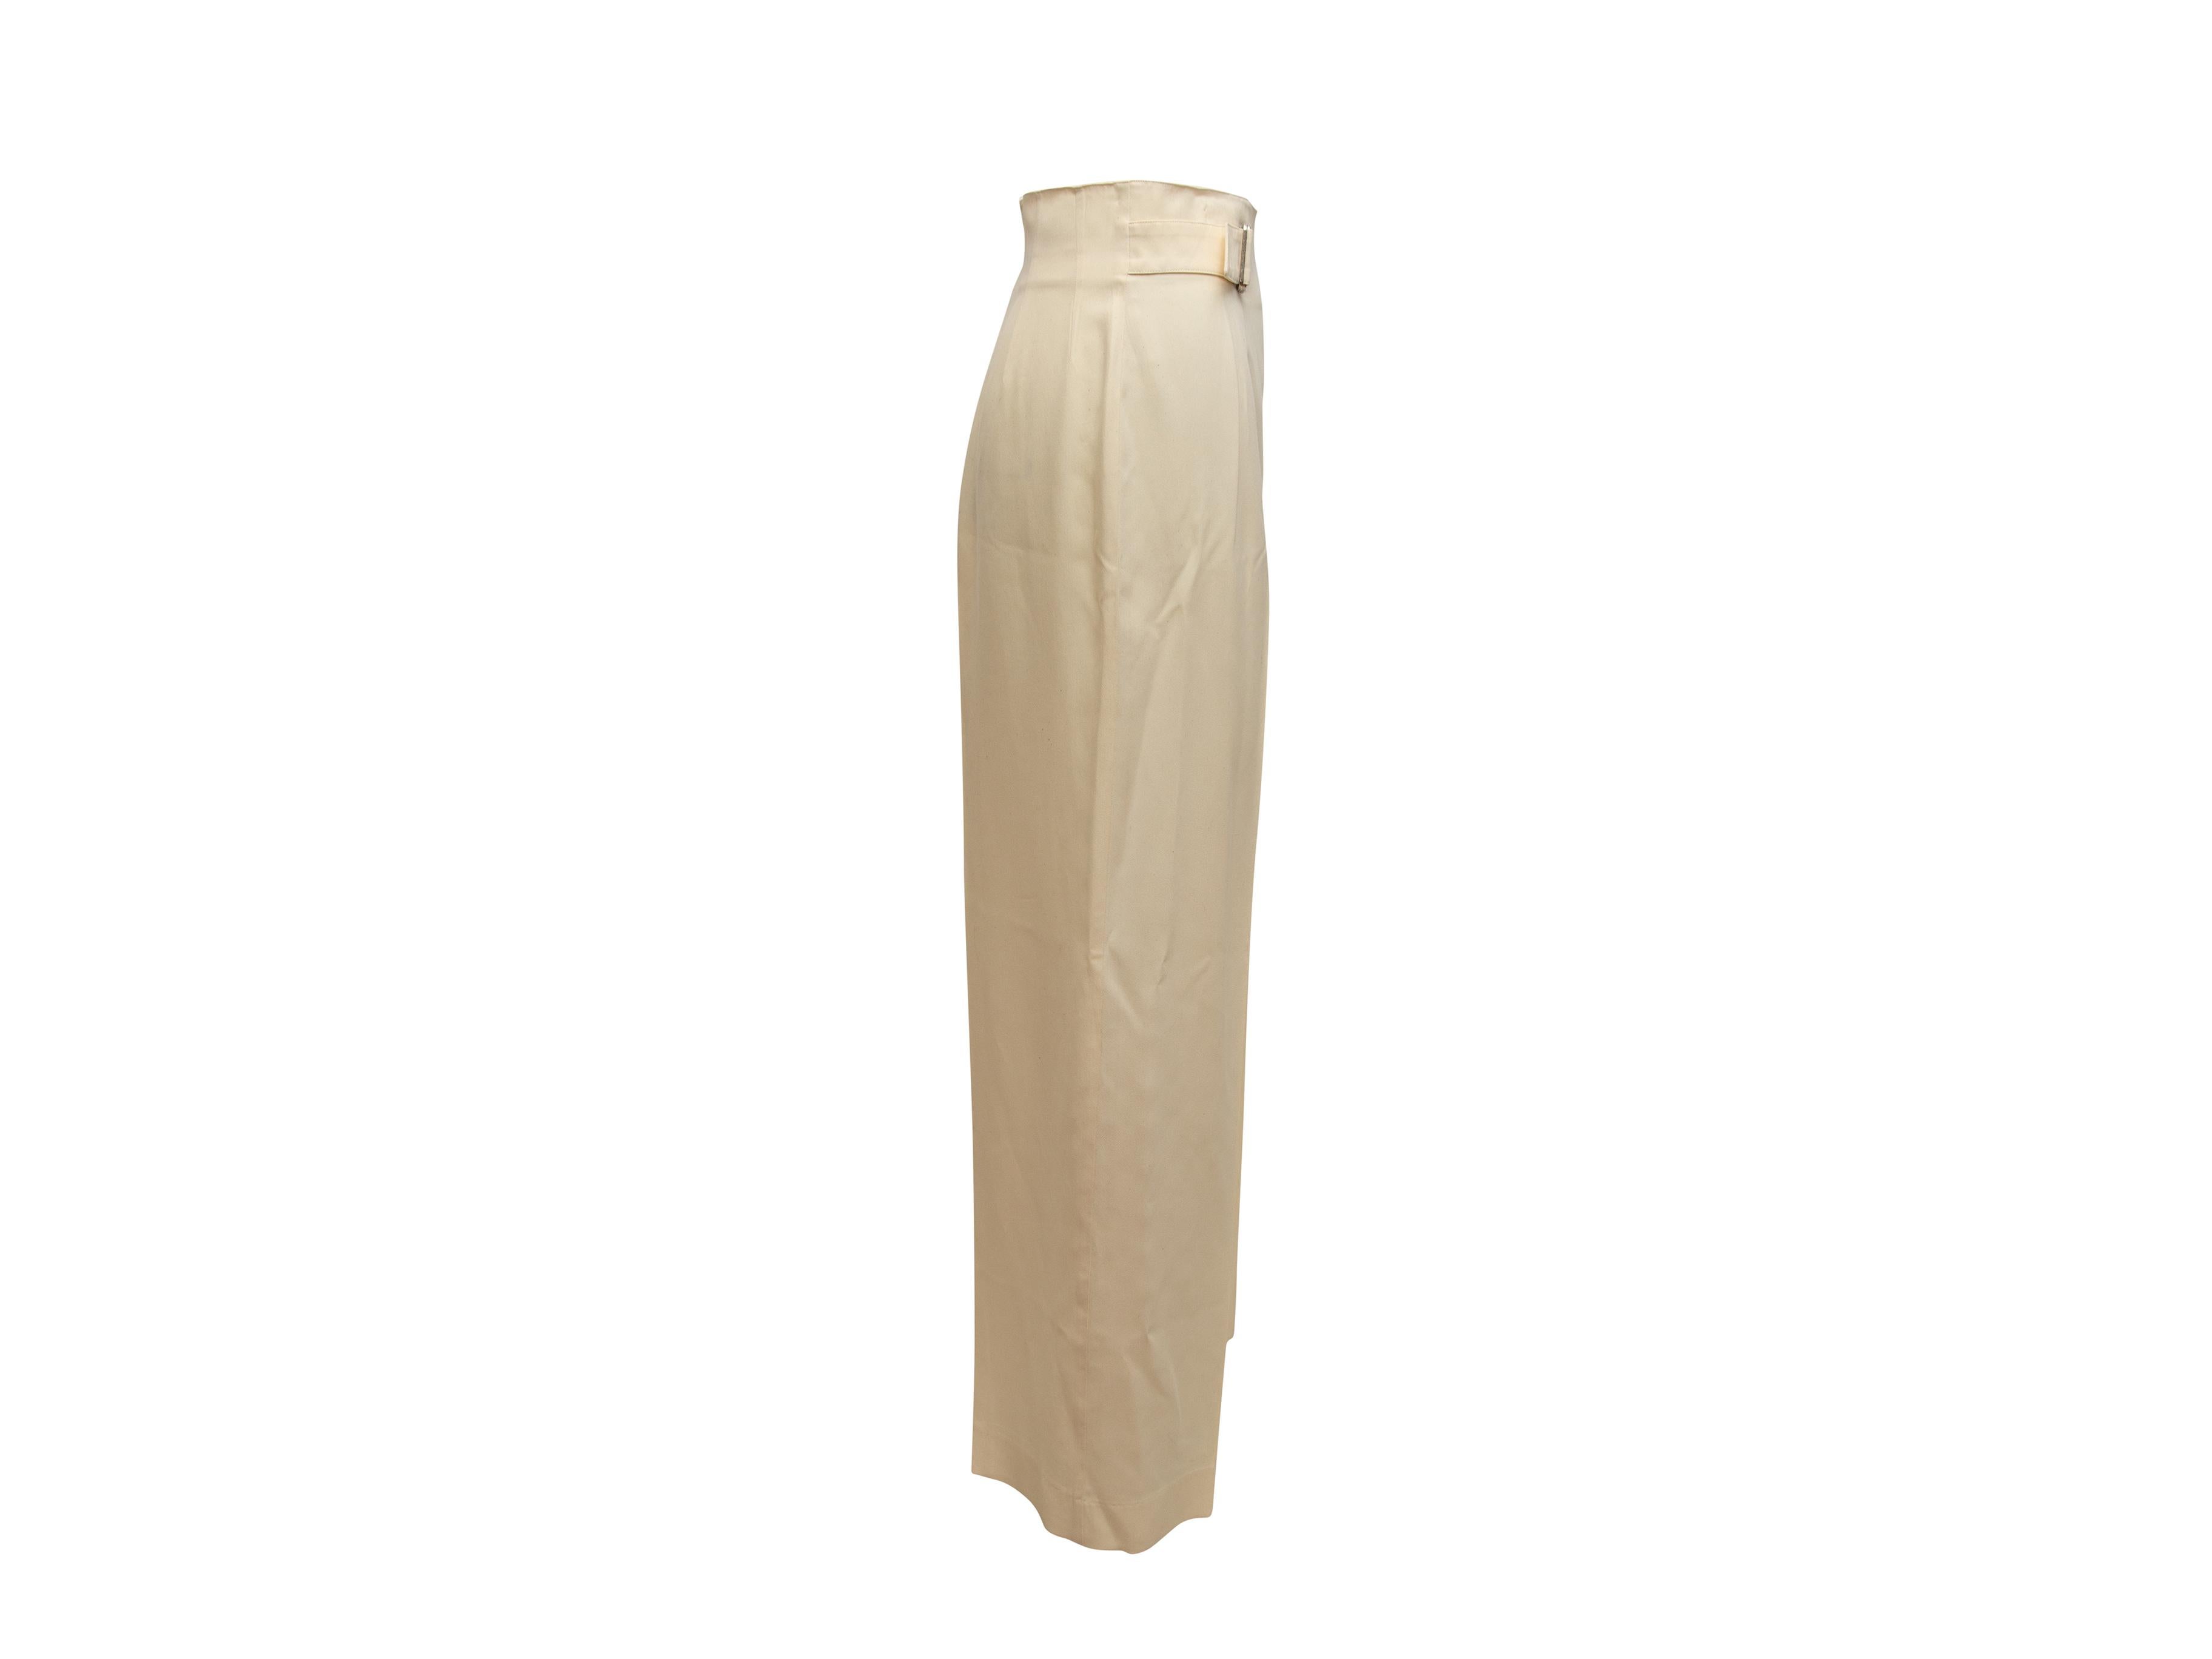 Product details: Vintage cream high-rise pants by Claude Montana. Silver-tone buckle closures at hips. Designer size 42. 28